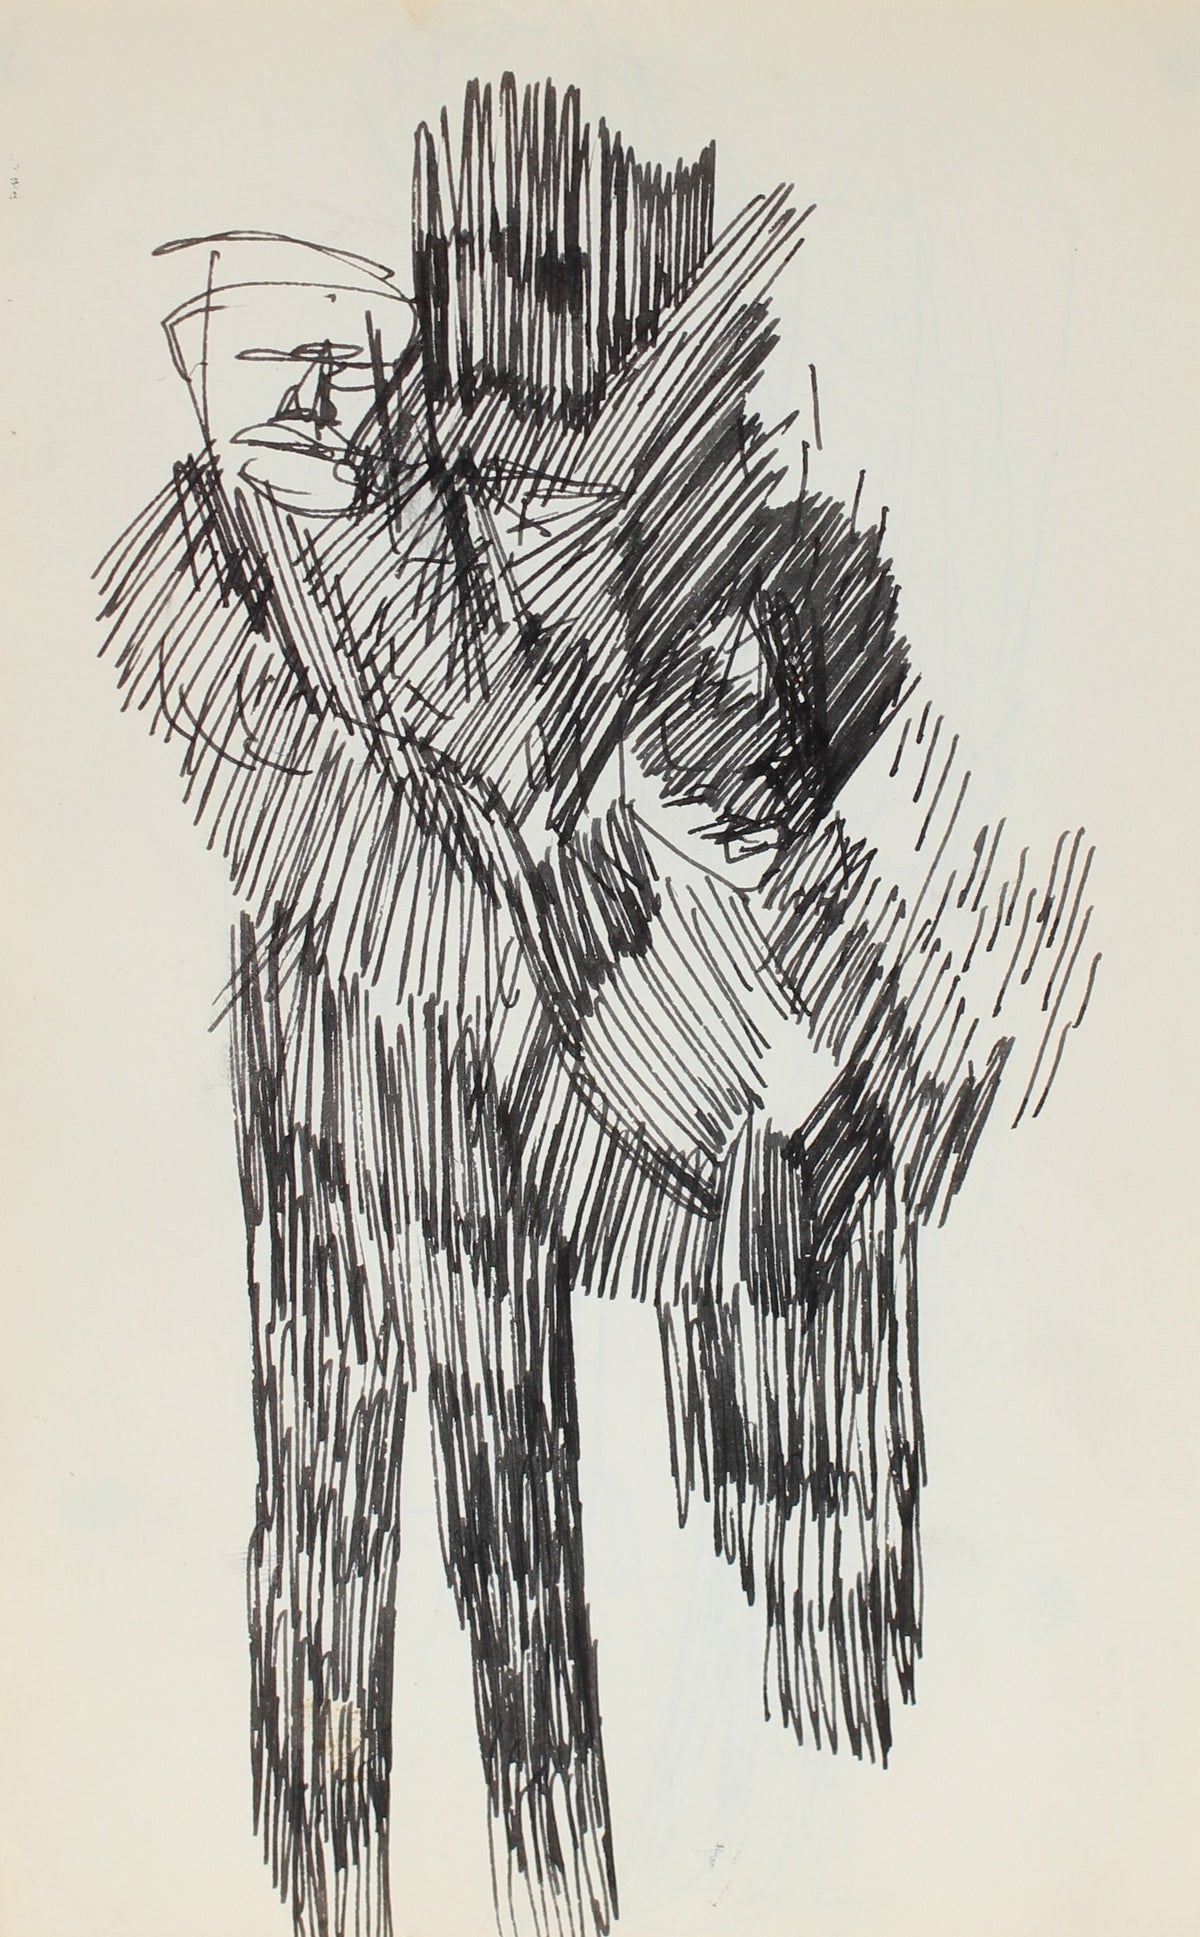 Shadowy Abstracted Couple&lt;br&gt;Ink, 1950-60s&lt;br&gt;&lt;br&gt;#0352